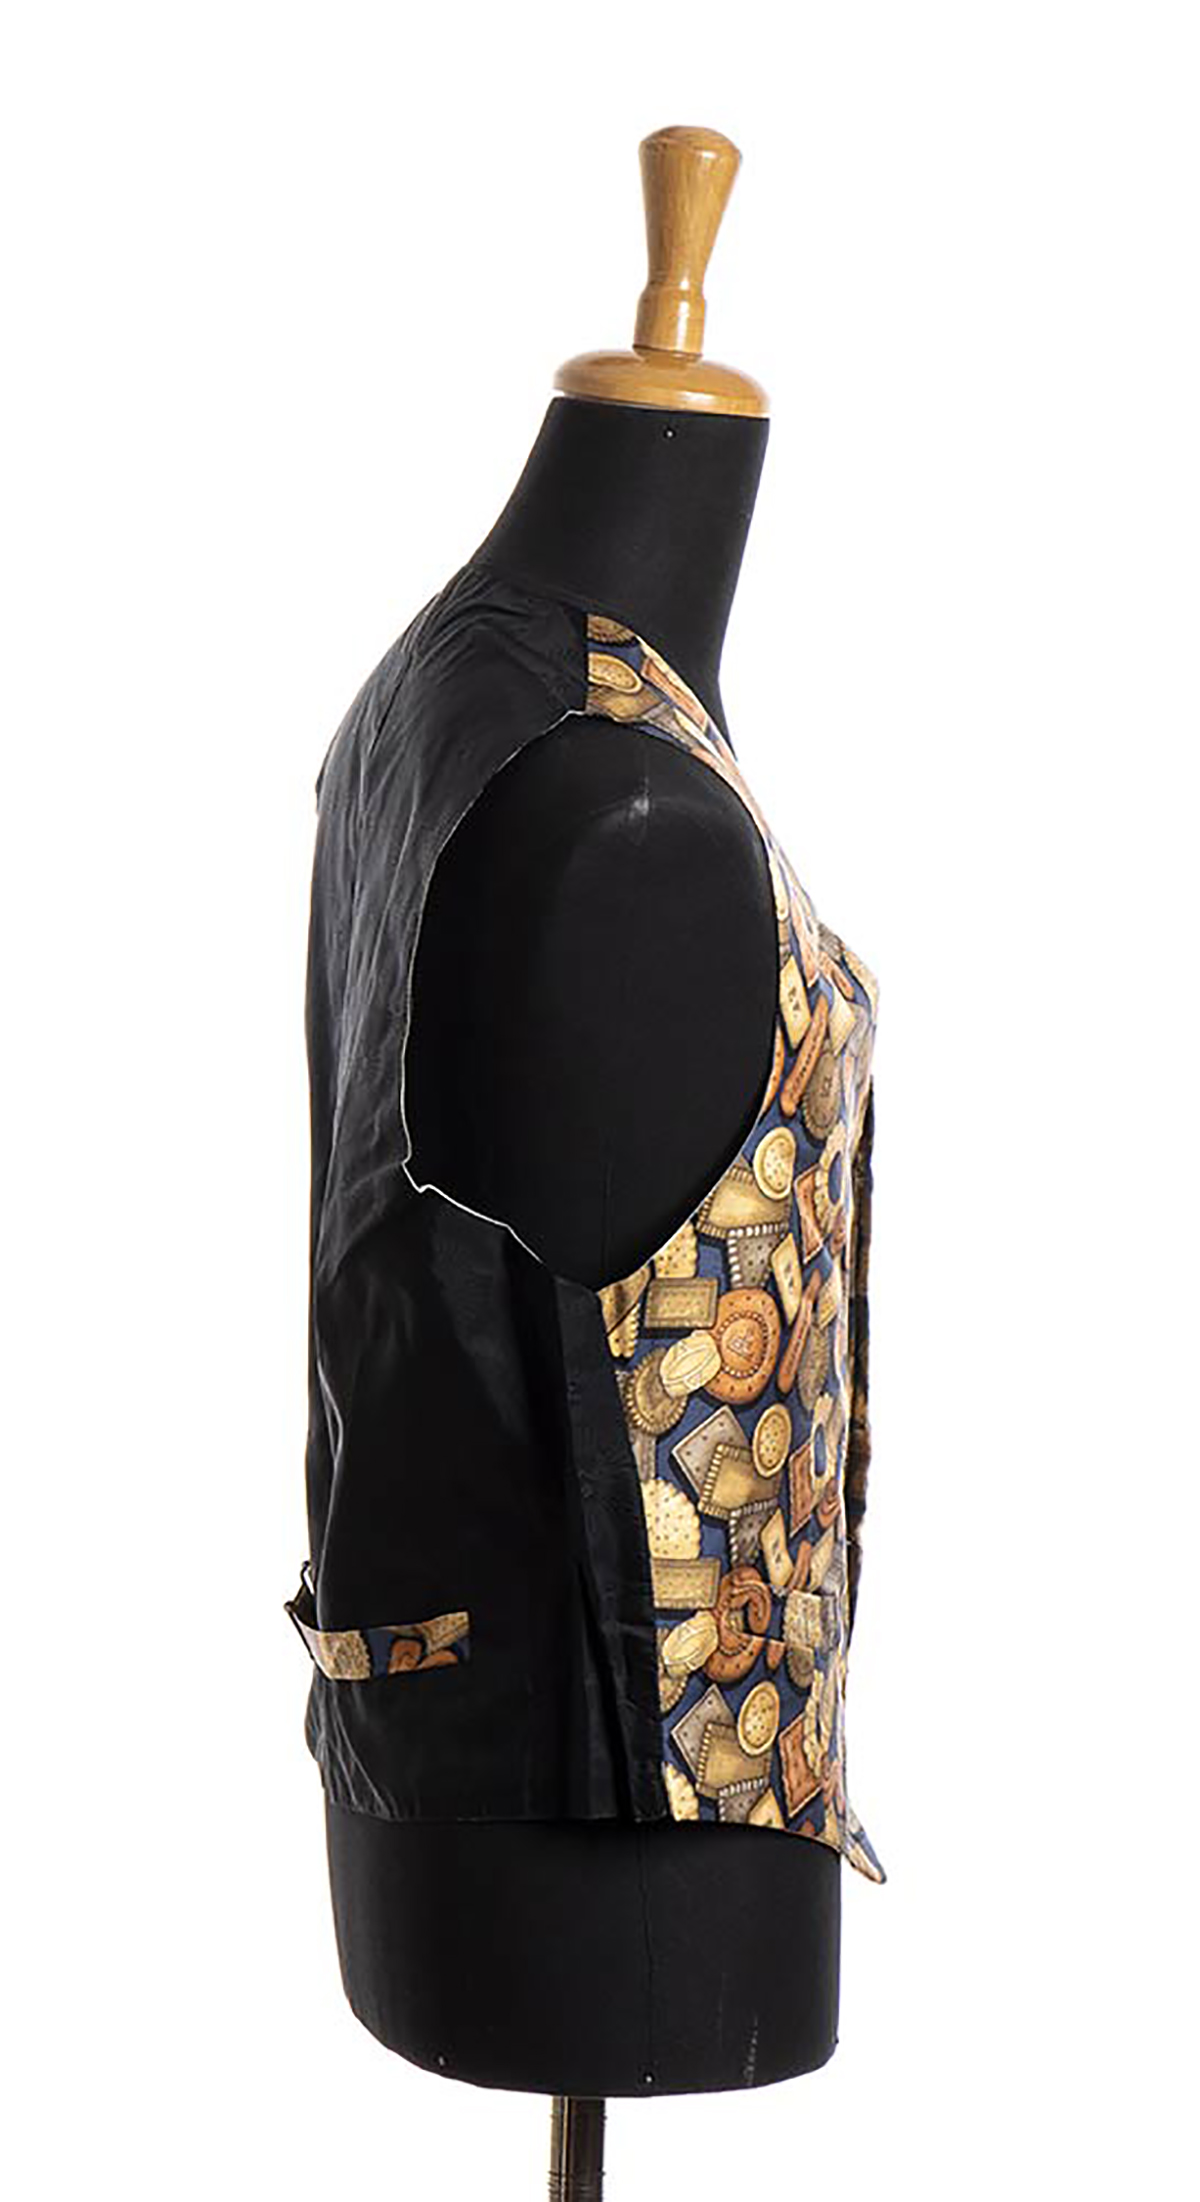 FORNASETTI SILK VEST 80s Silk vest with original box. General Conditions grading A (new with tag) - Image 2 of 5